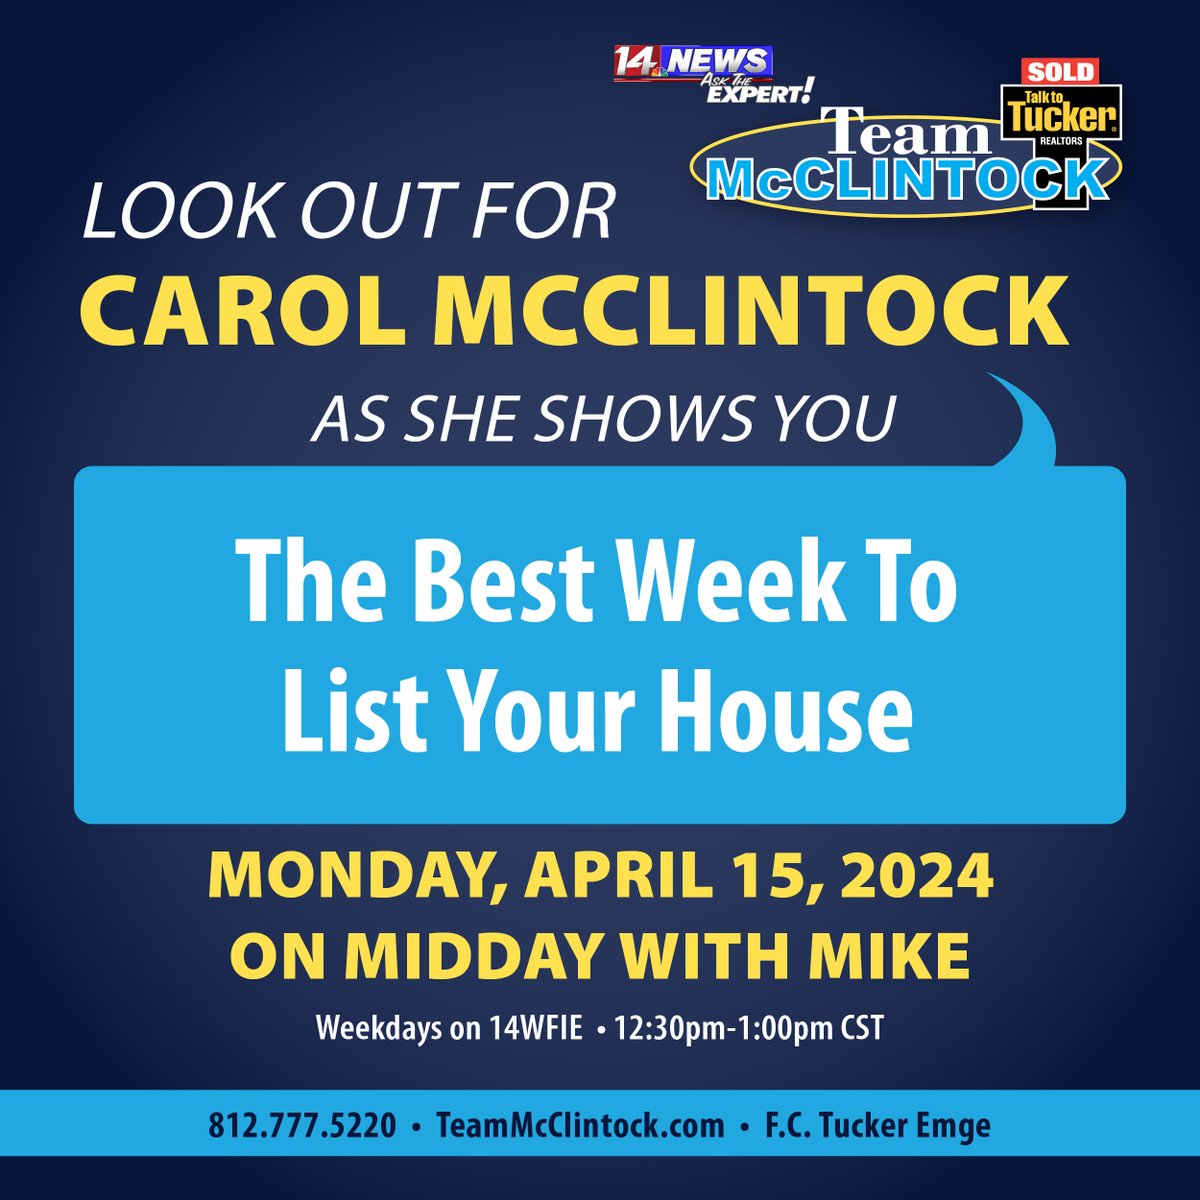 🌟 Selling your home? The best week is April 14-20! Catch Carol McClintock on #MiddayWithMike, TODAY, to find out why it's the golden window for home sellers. Tune in and get ready to list! 🏡✨ #RealEstateInsights #SellSmart #TeamMcClintock